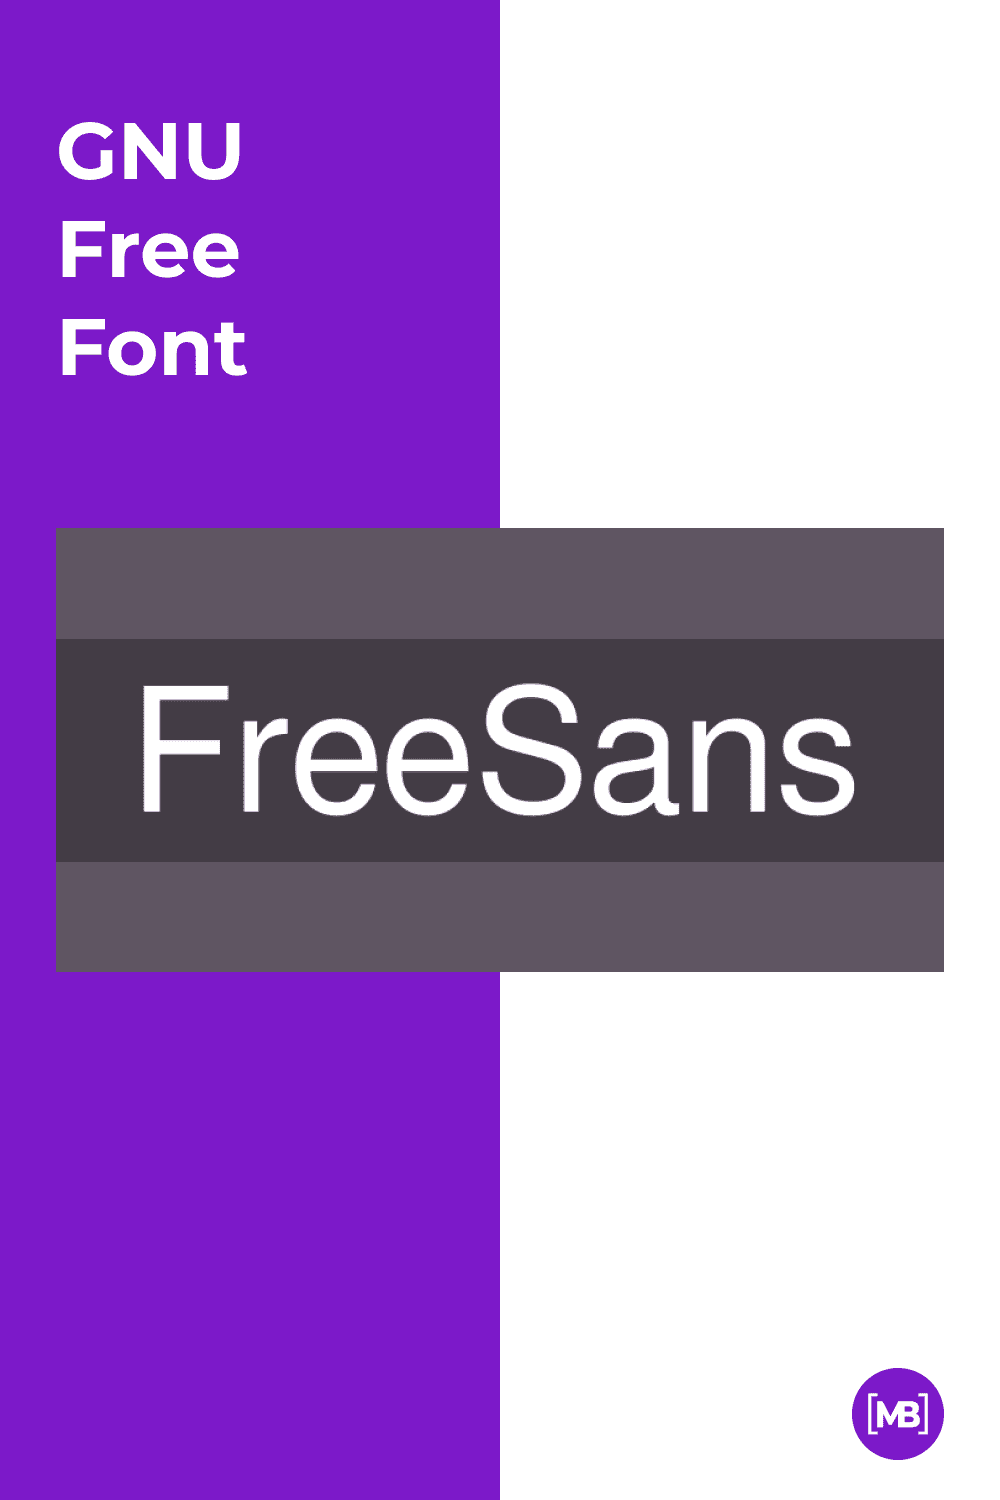 This is a simple font that will suit any theme and business area.